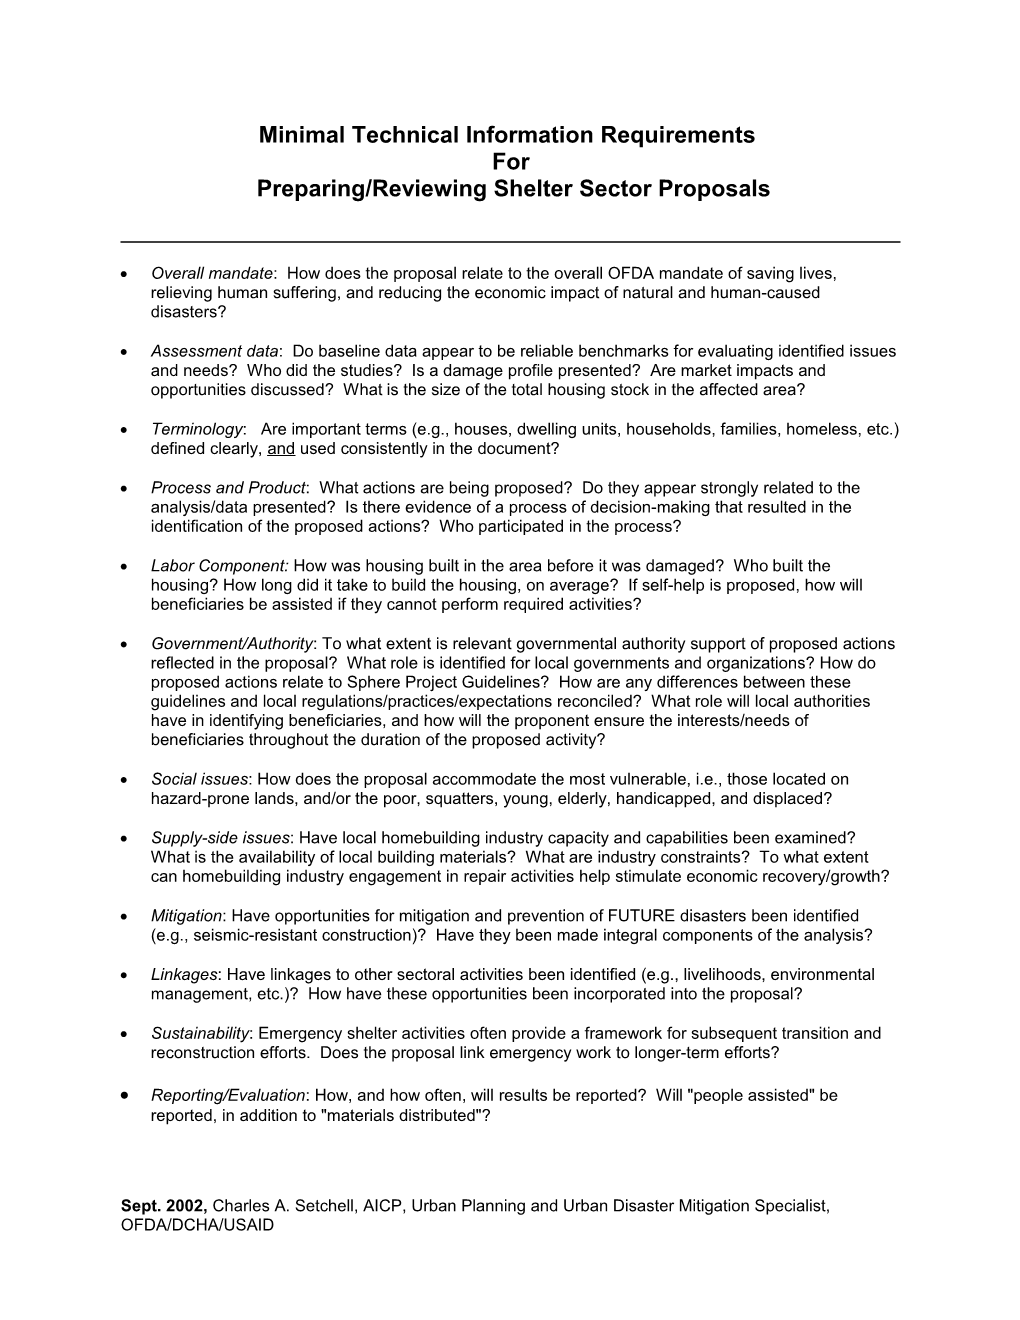 Minimal Technical Information Requirements for Preparing/Reviewing Shelter Sector Proposals